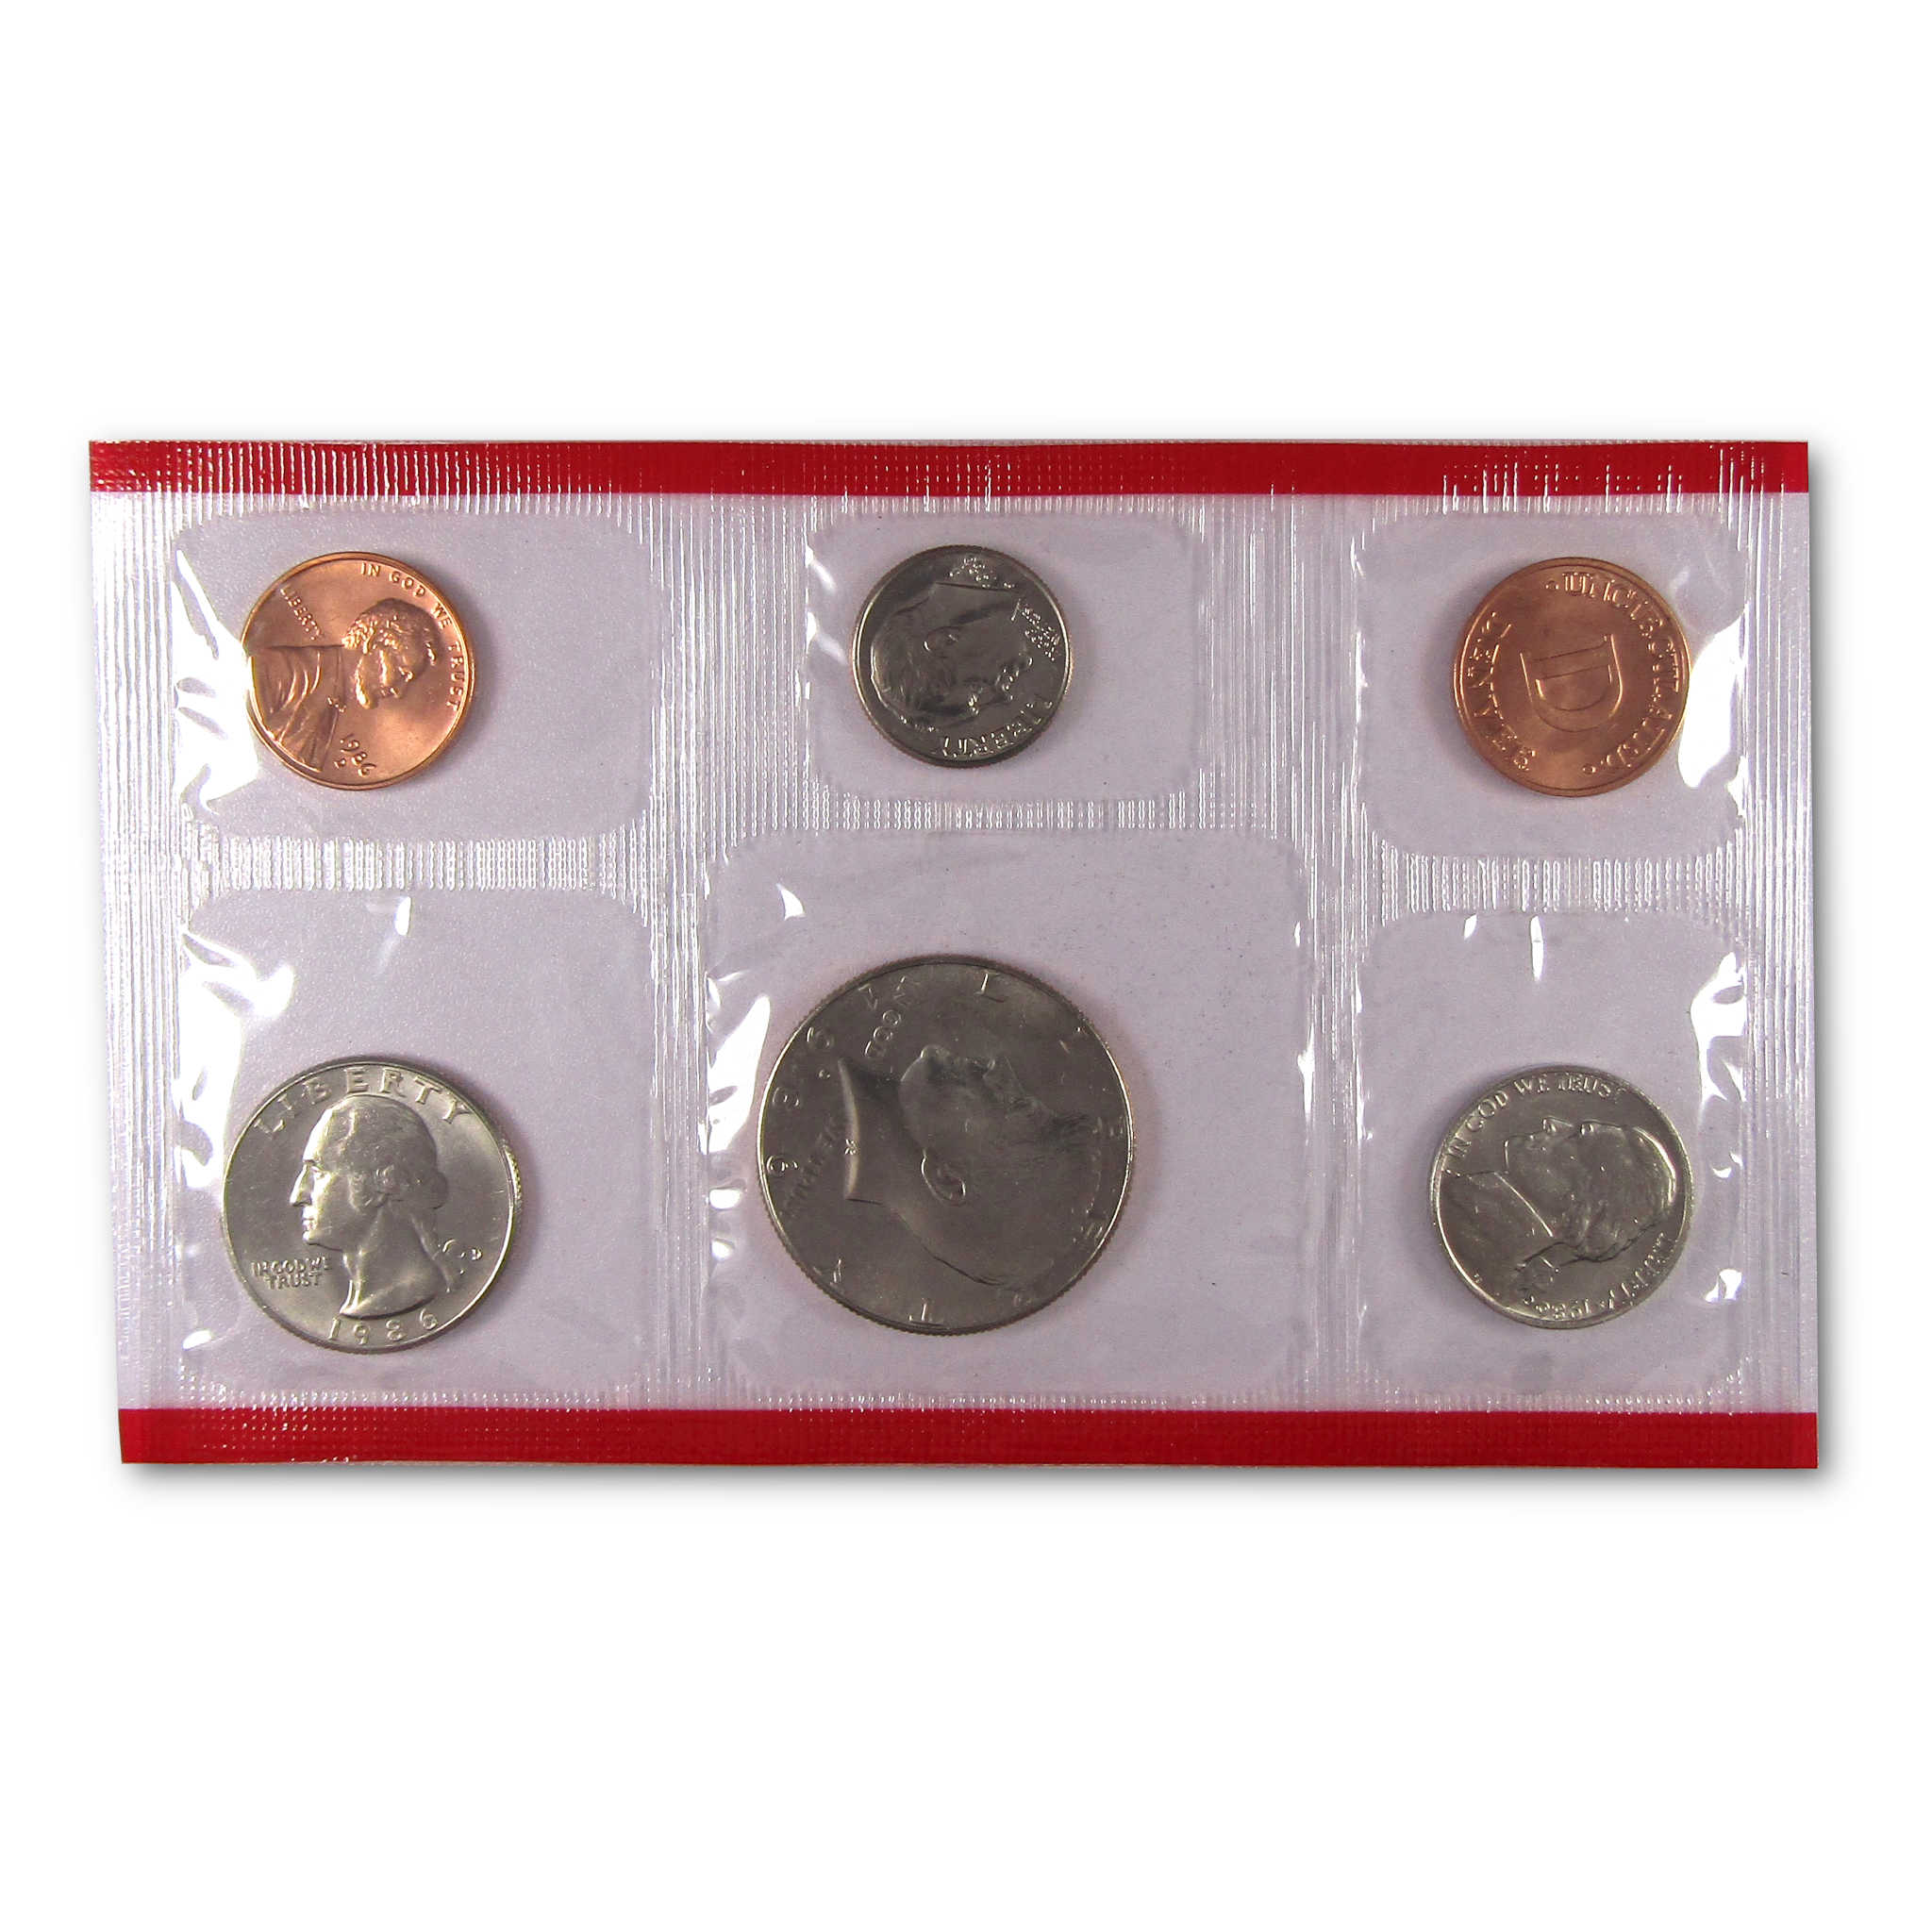 1986 Uncirculated Coin Set U.S Mint Original Government Packaging OGP